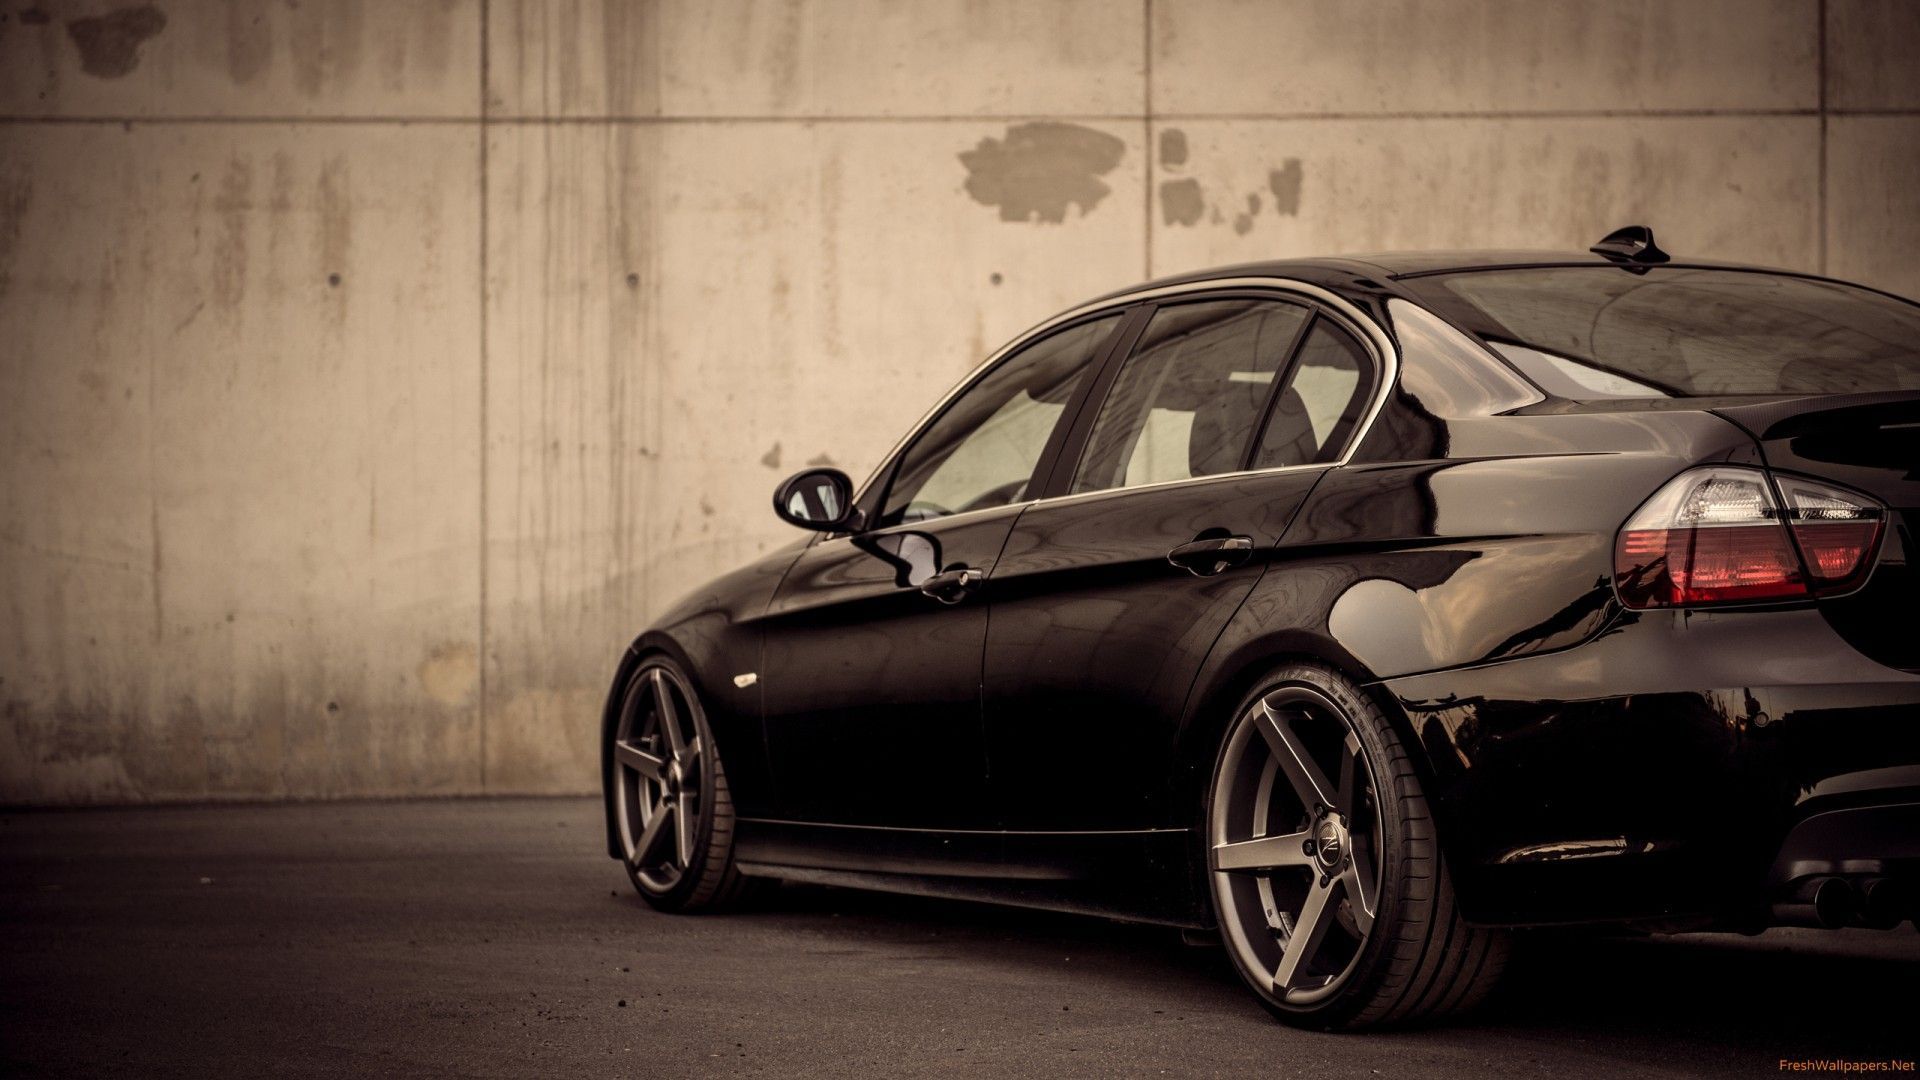 Bmw e90 z performance wallpapers Freshwallpapers